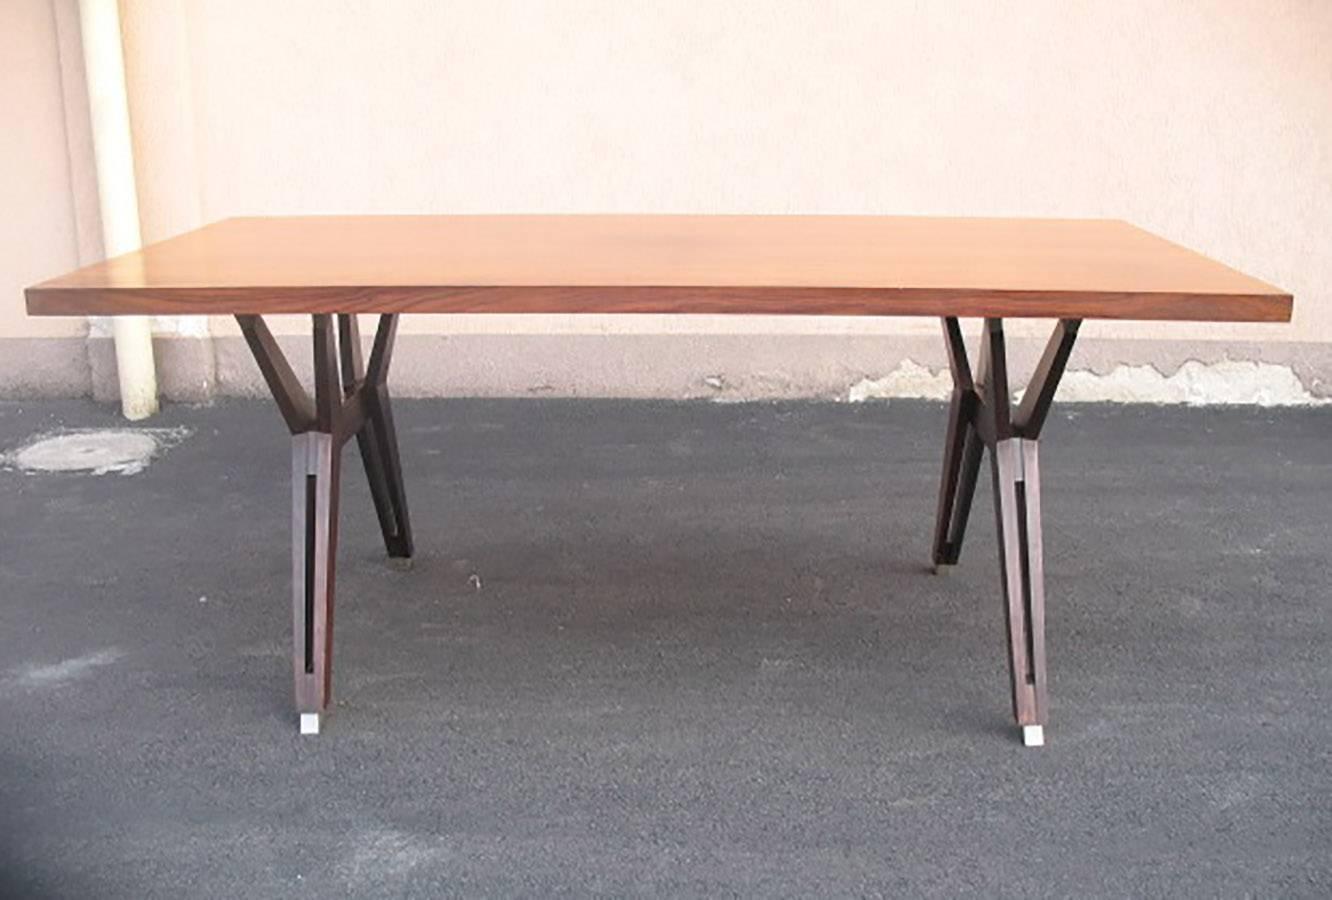 Beautiful table; iconic techinical design by Ico Parisi for MIM (Mobili Italiani Moderni) in Roma.
Rosewood rectangular top on wood legs with final brushed steel sabot.